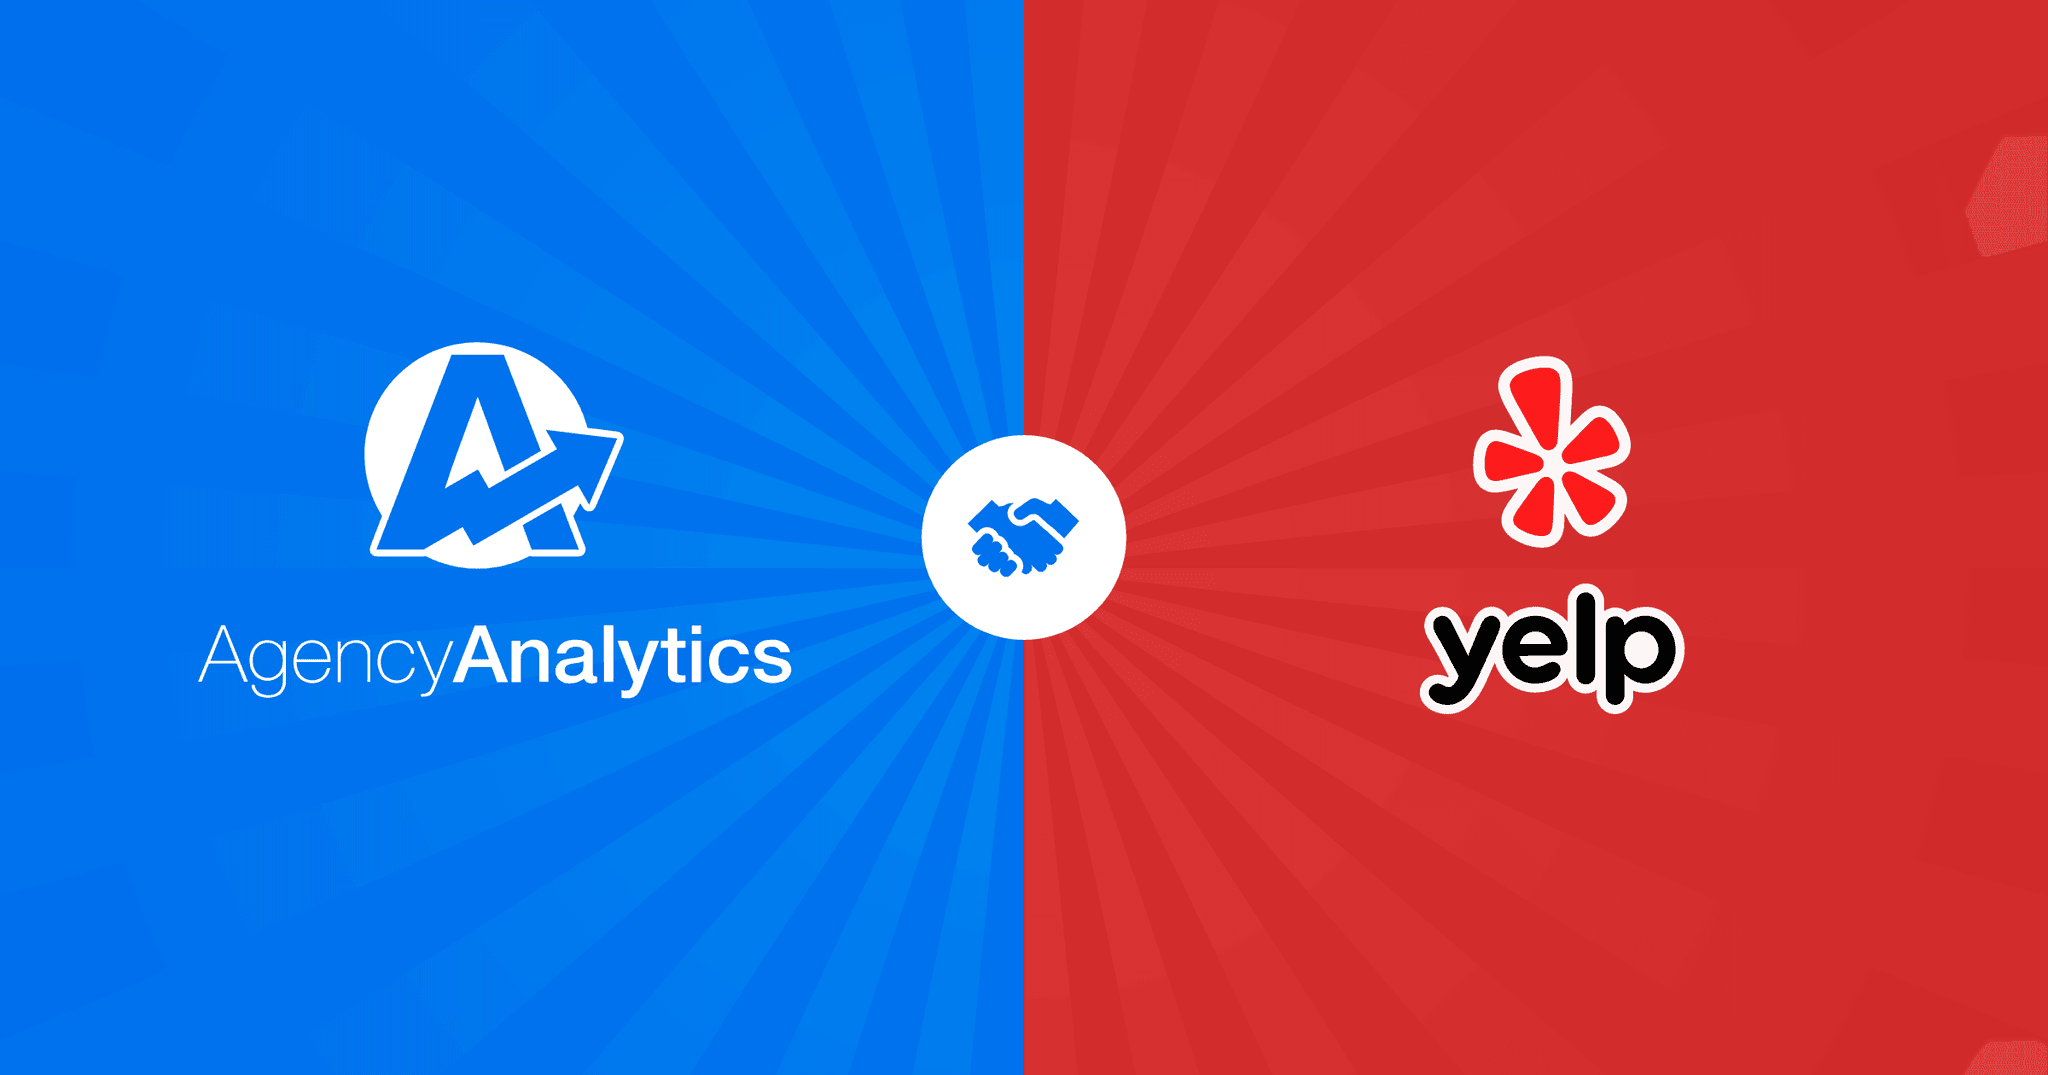 AgencyAnalytics and Yelp Logos shown together